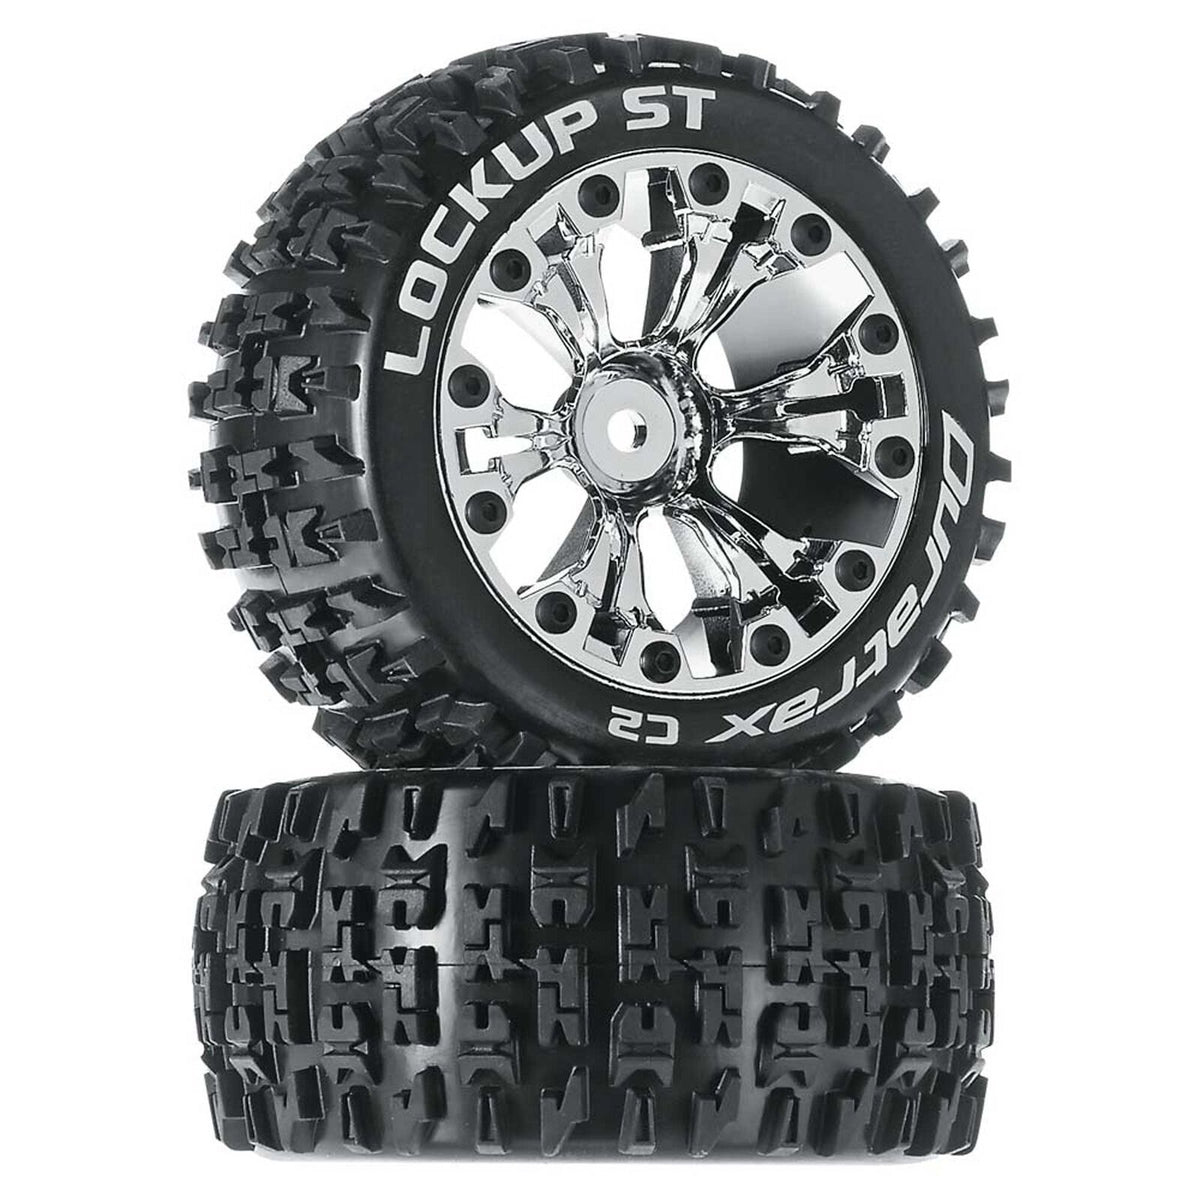 Lockup ST 2.8" 2WD Mounted Rear Tires, Chrome (2) - DTXC3567